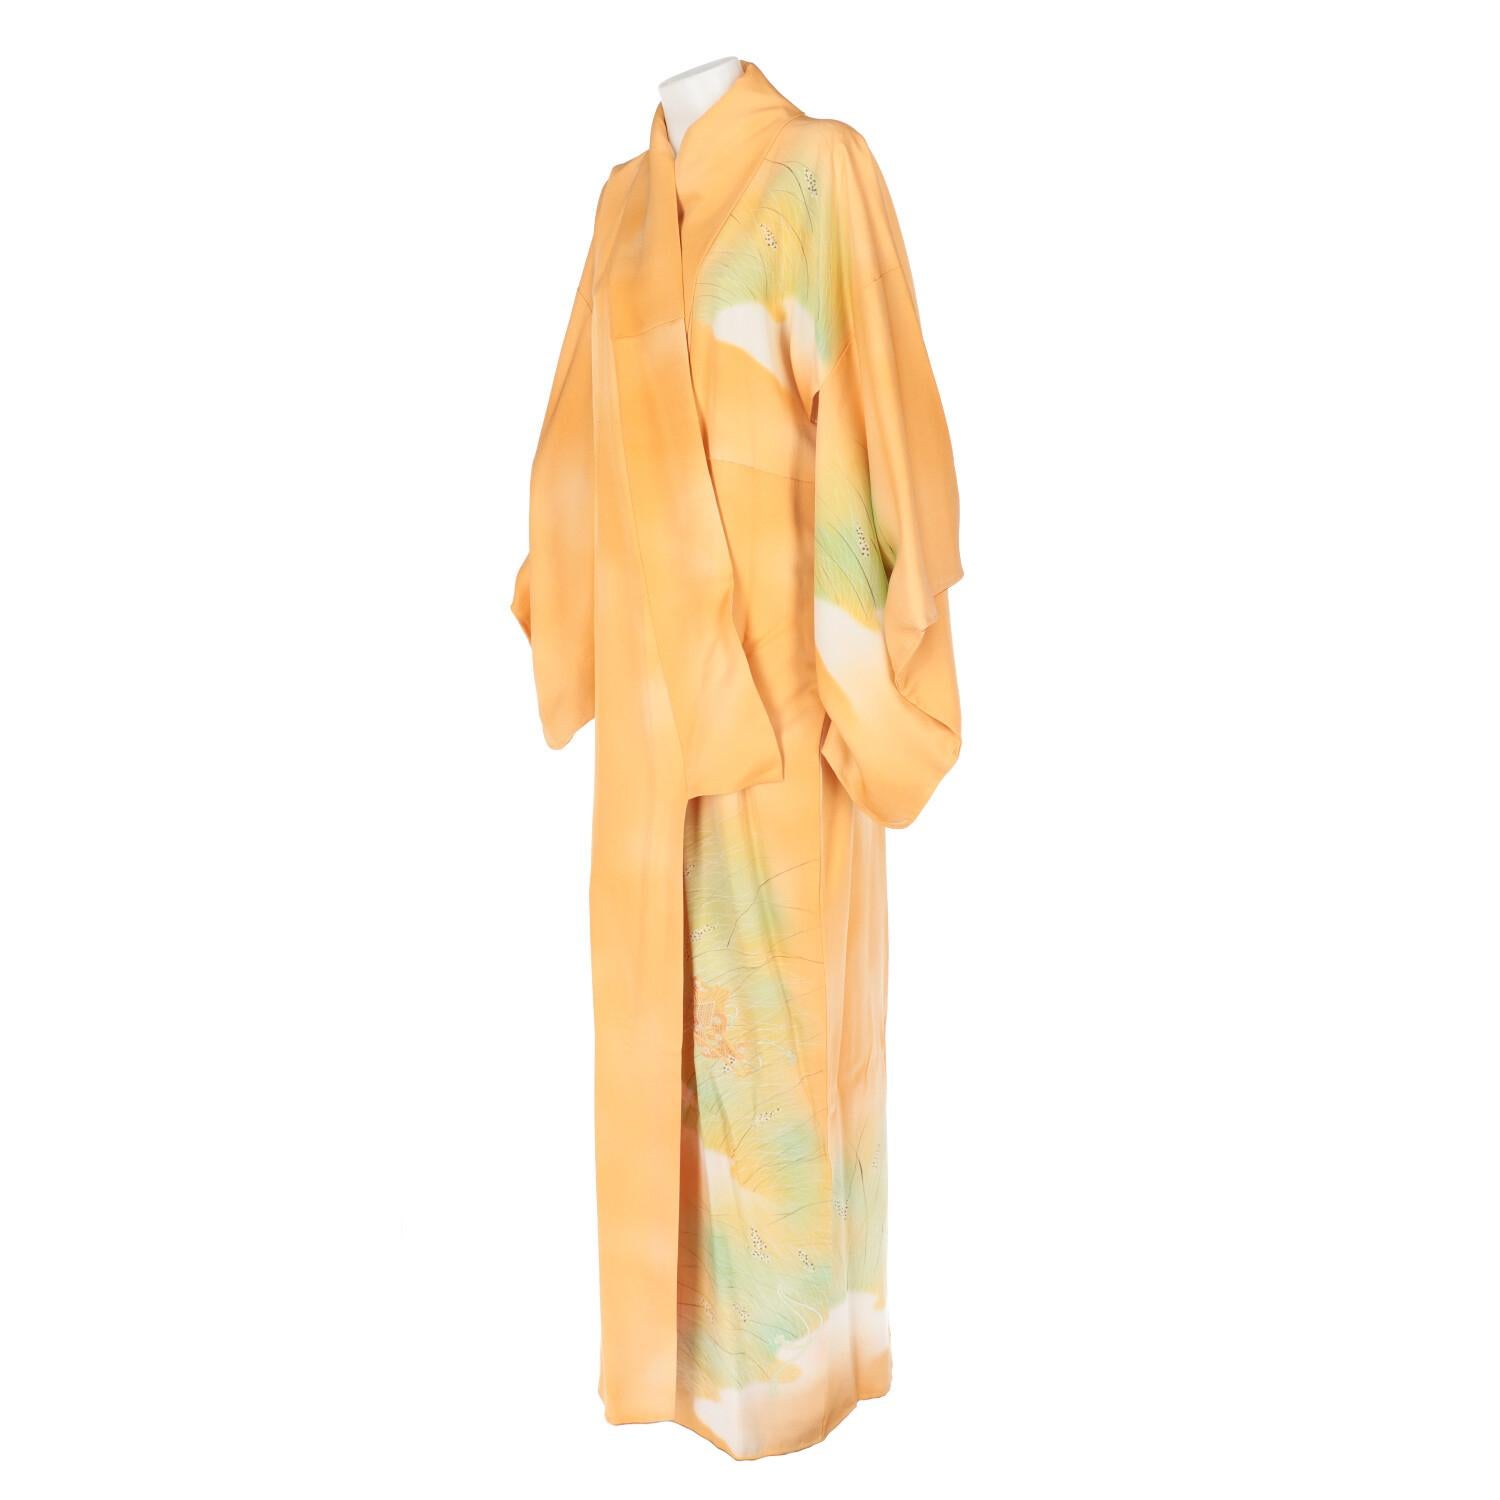 A.N.G.E.L.O. Vintage Cult in apricot-colored silk Japanese Kimono with print in shades of green, yellow and white. Shawl collar, 3/4 sleeves and long to the feet.

One size

Product code: X0311

Composition: Silk

Made in: Japan

Condition: Very